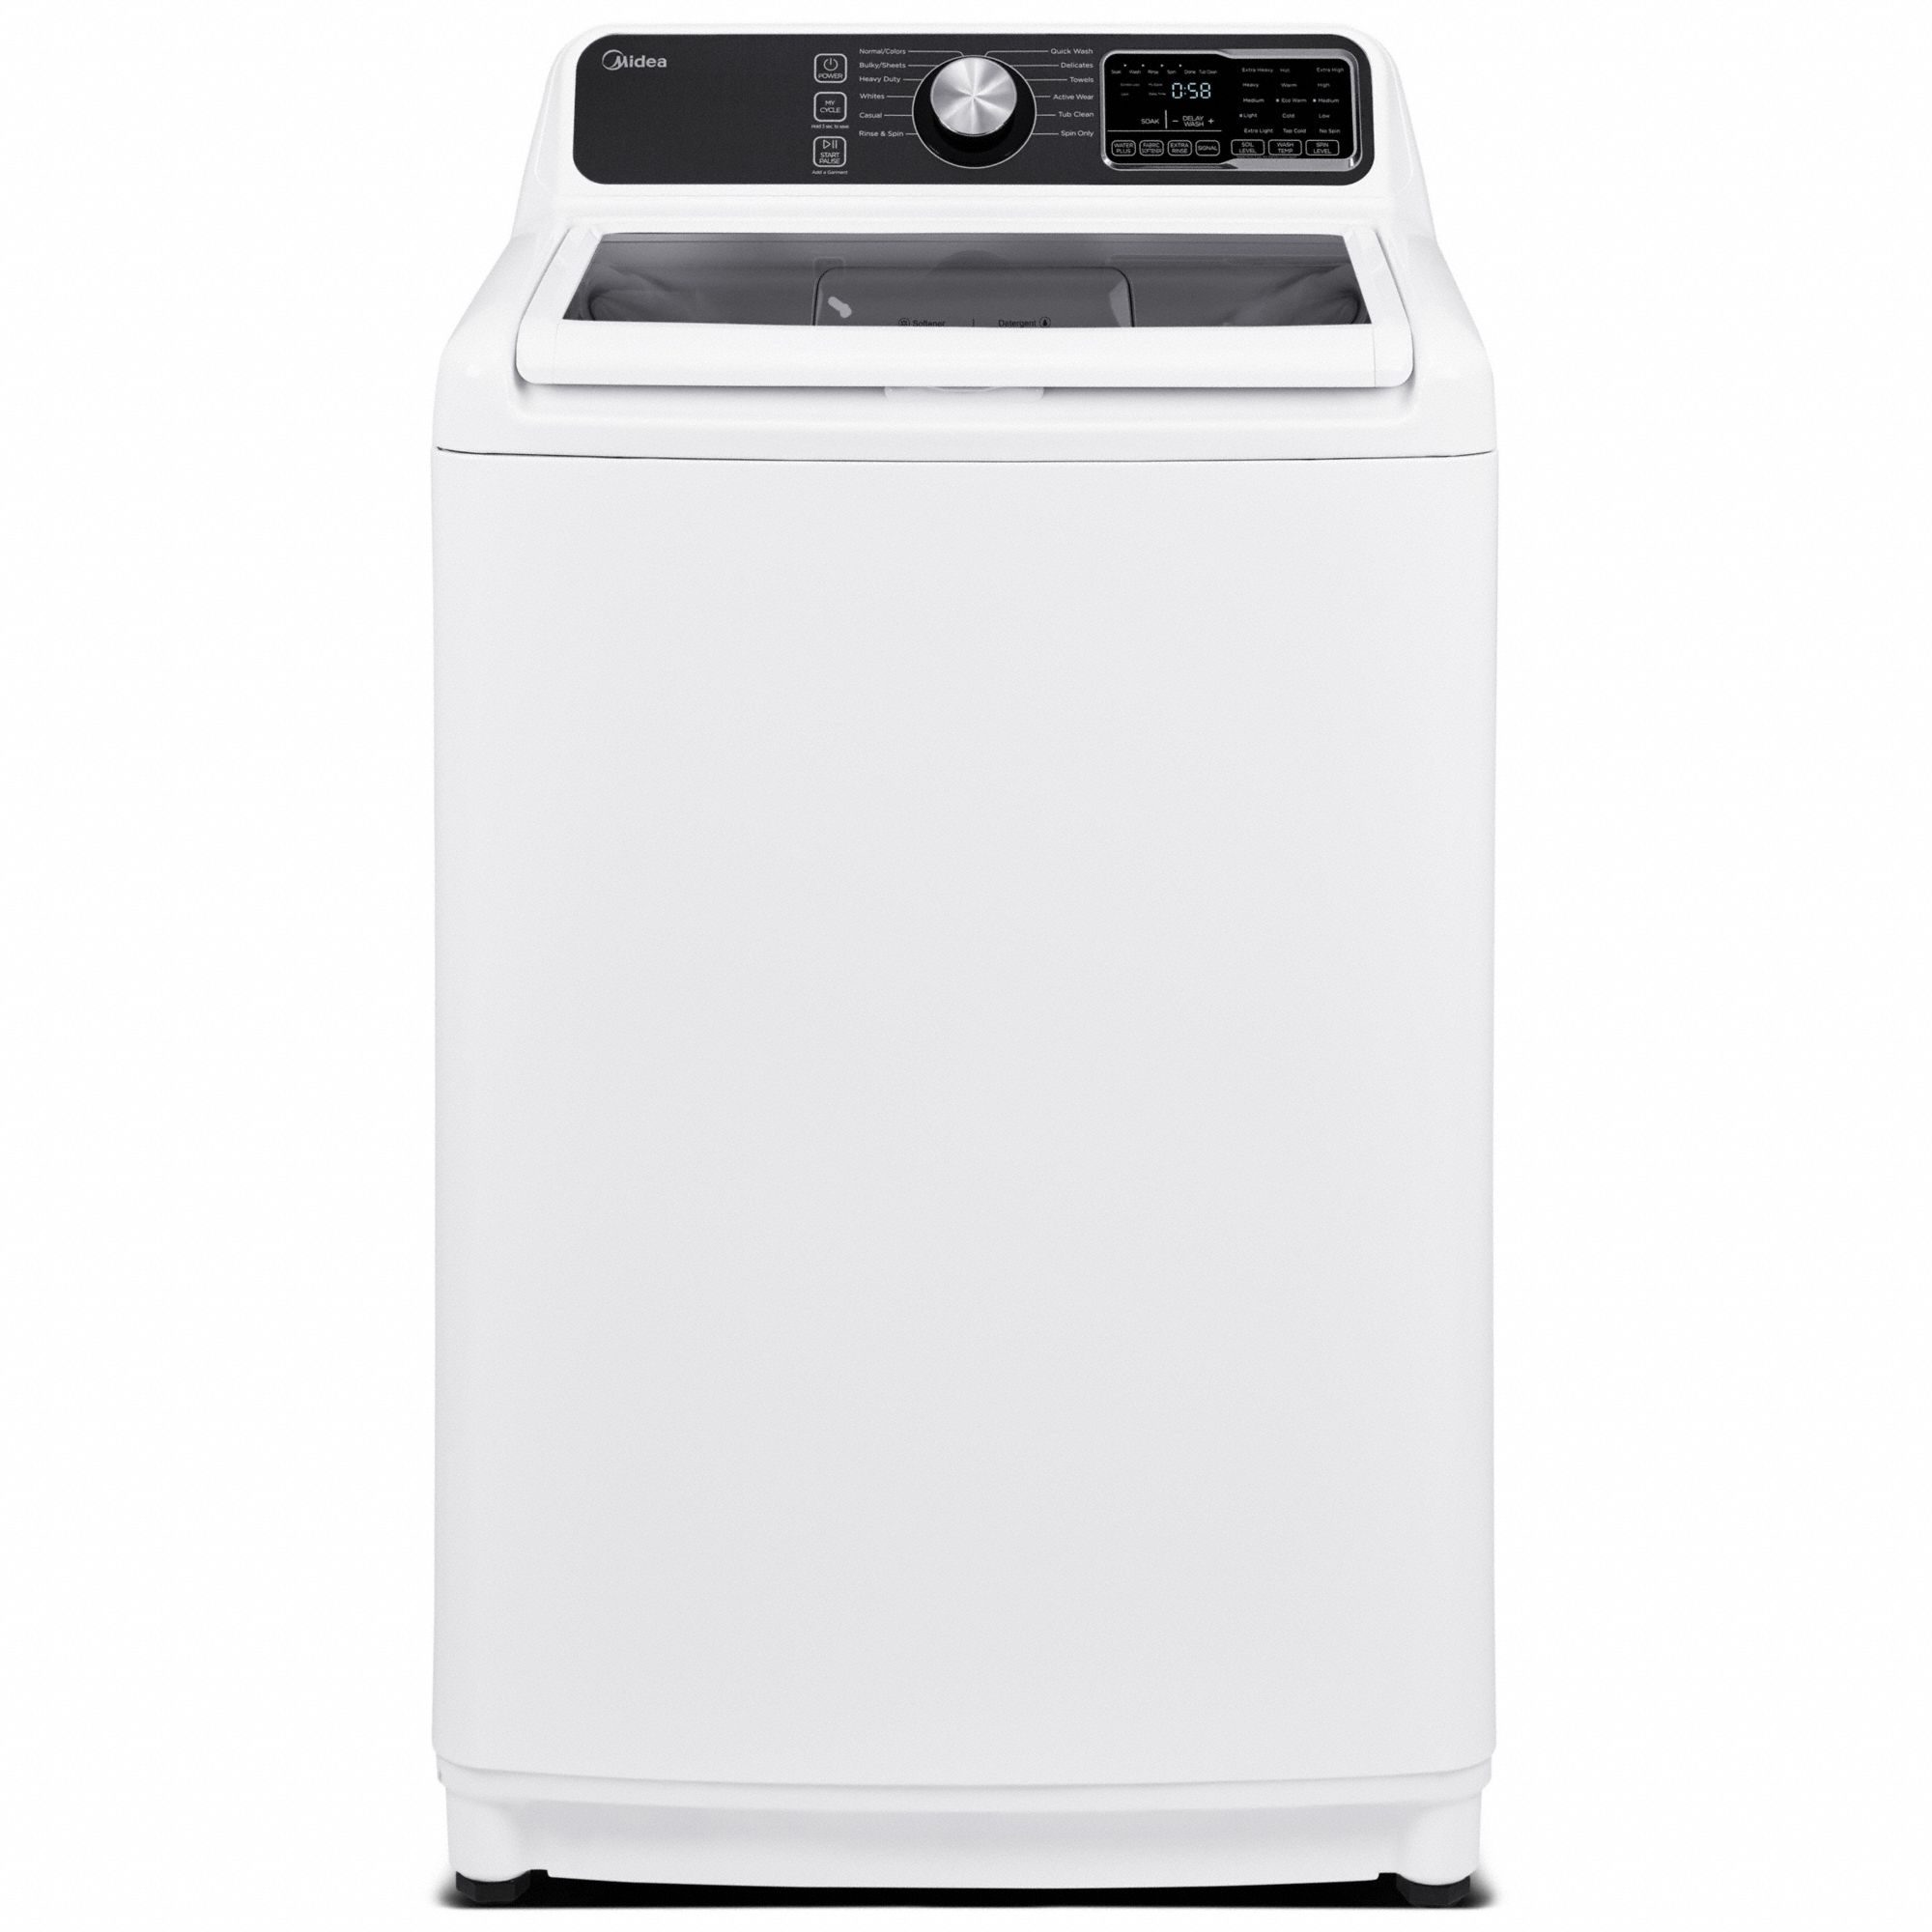 Washer: White, 4.5 cu ft Capacity, Top Load, Stackable, Energy Star Certified, Antimicrobial